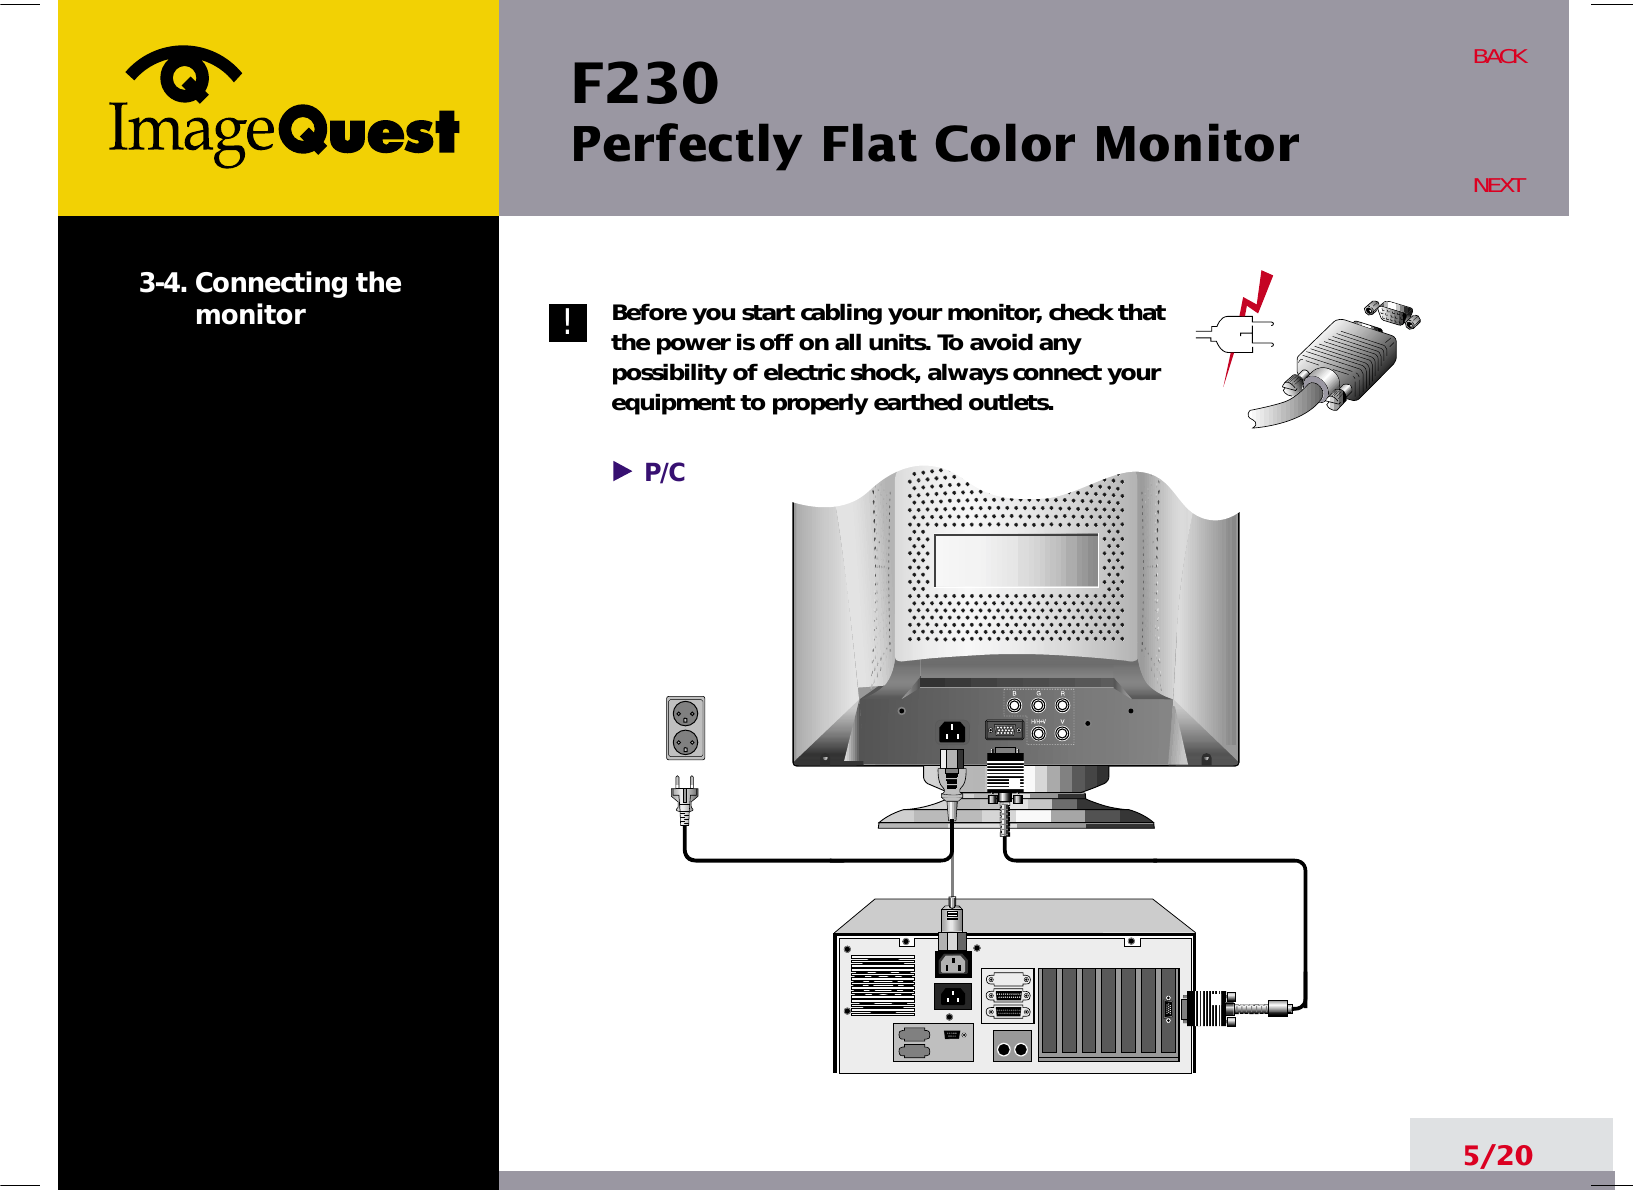 F230 Perfectly Flat Color Monitor5/20BACKNEXT3-4. Connecting themonitor Before you start cabling your monitor, check thatthe power is off on all units. To avoid anypossibility of electric shock, always connect yourequipment to properly earthed outlets.!P/C